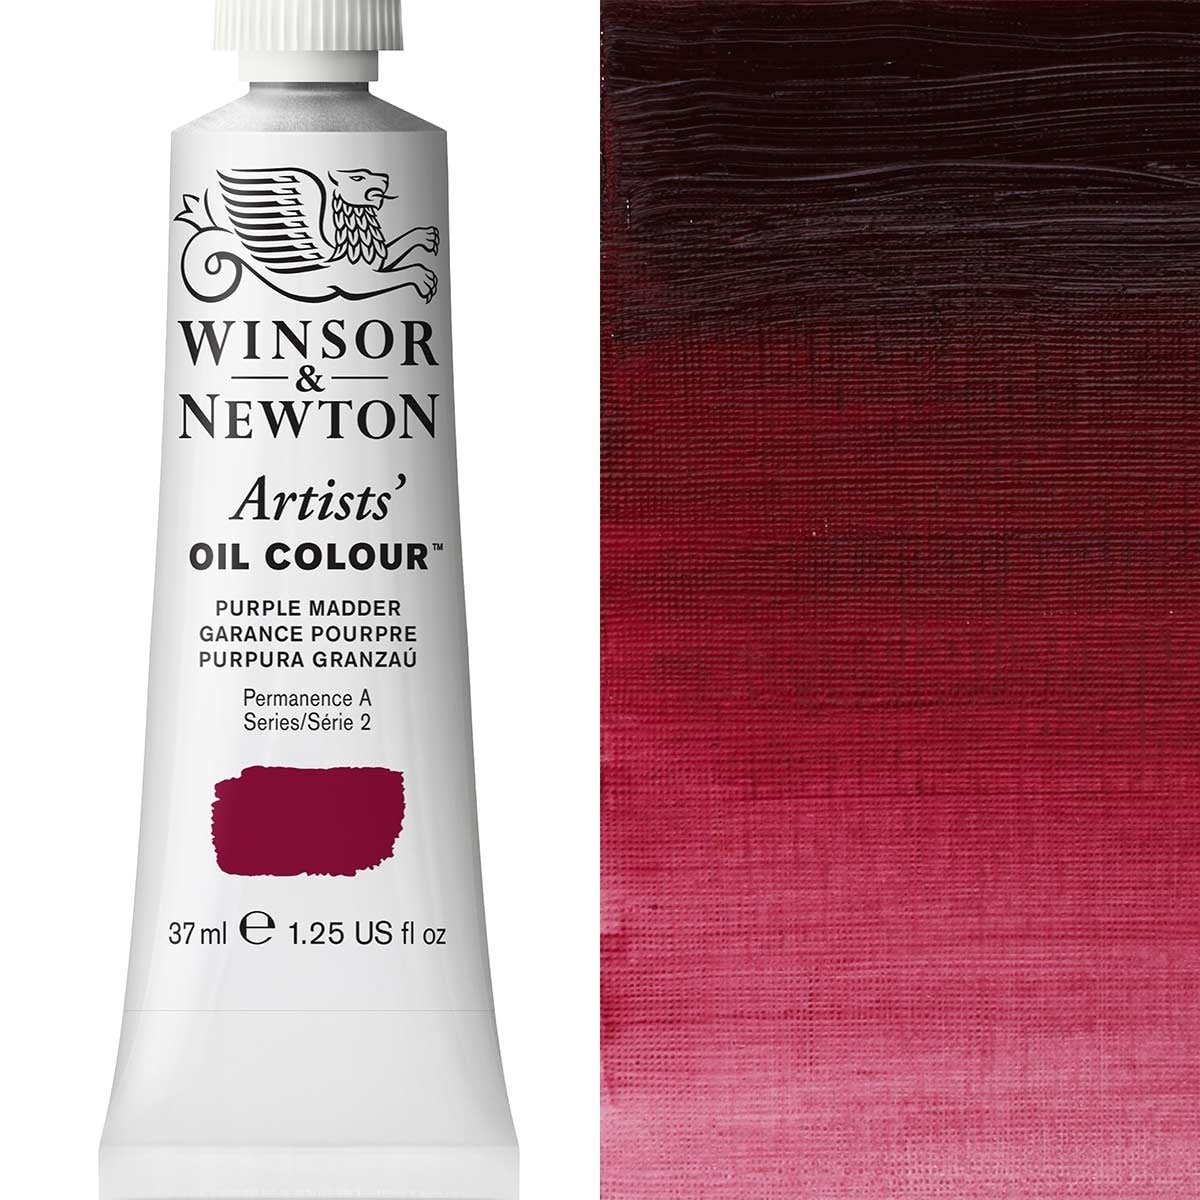 Winsor and Newton - Artists' Oil Colour - 37ml - Purple Madder